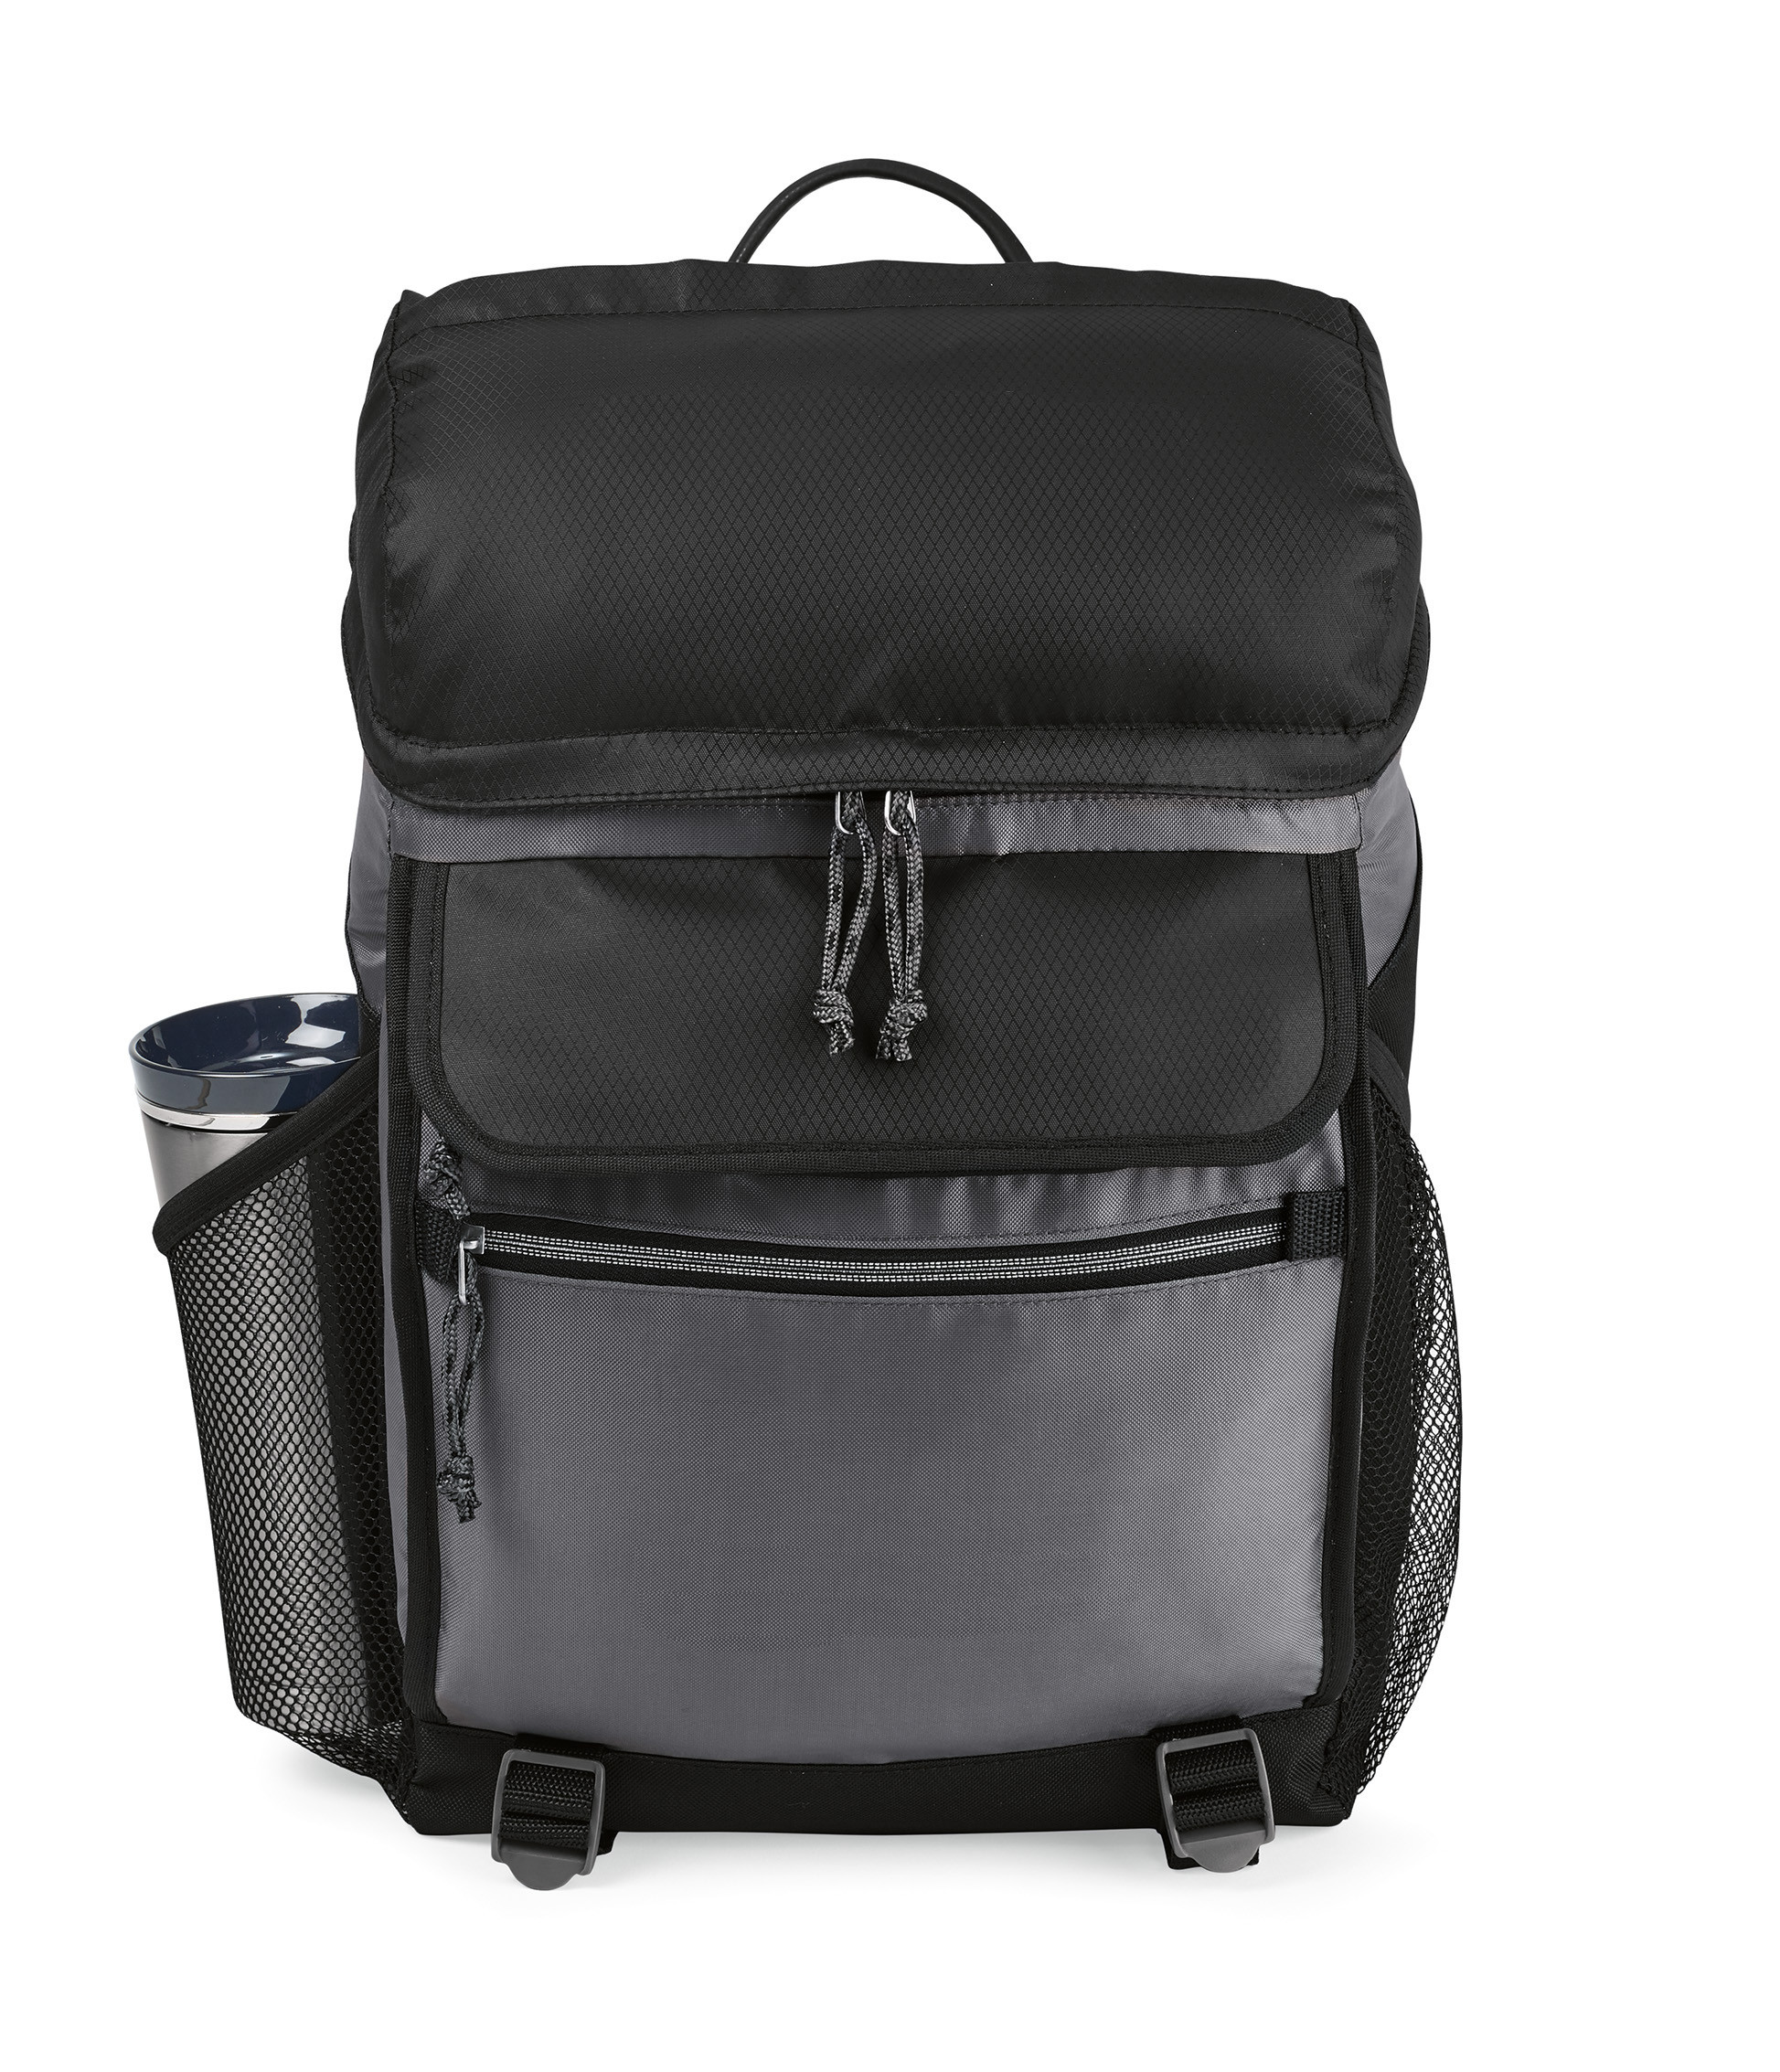 Gemline 5234 - Excursion Computer Backpack with Insulated Pocket